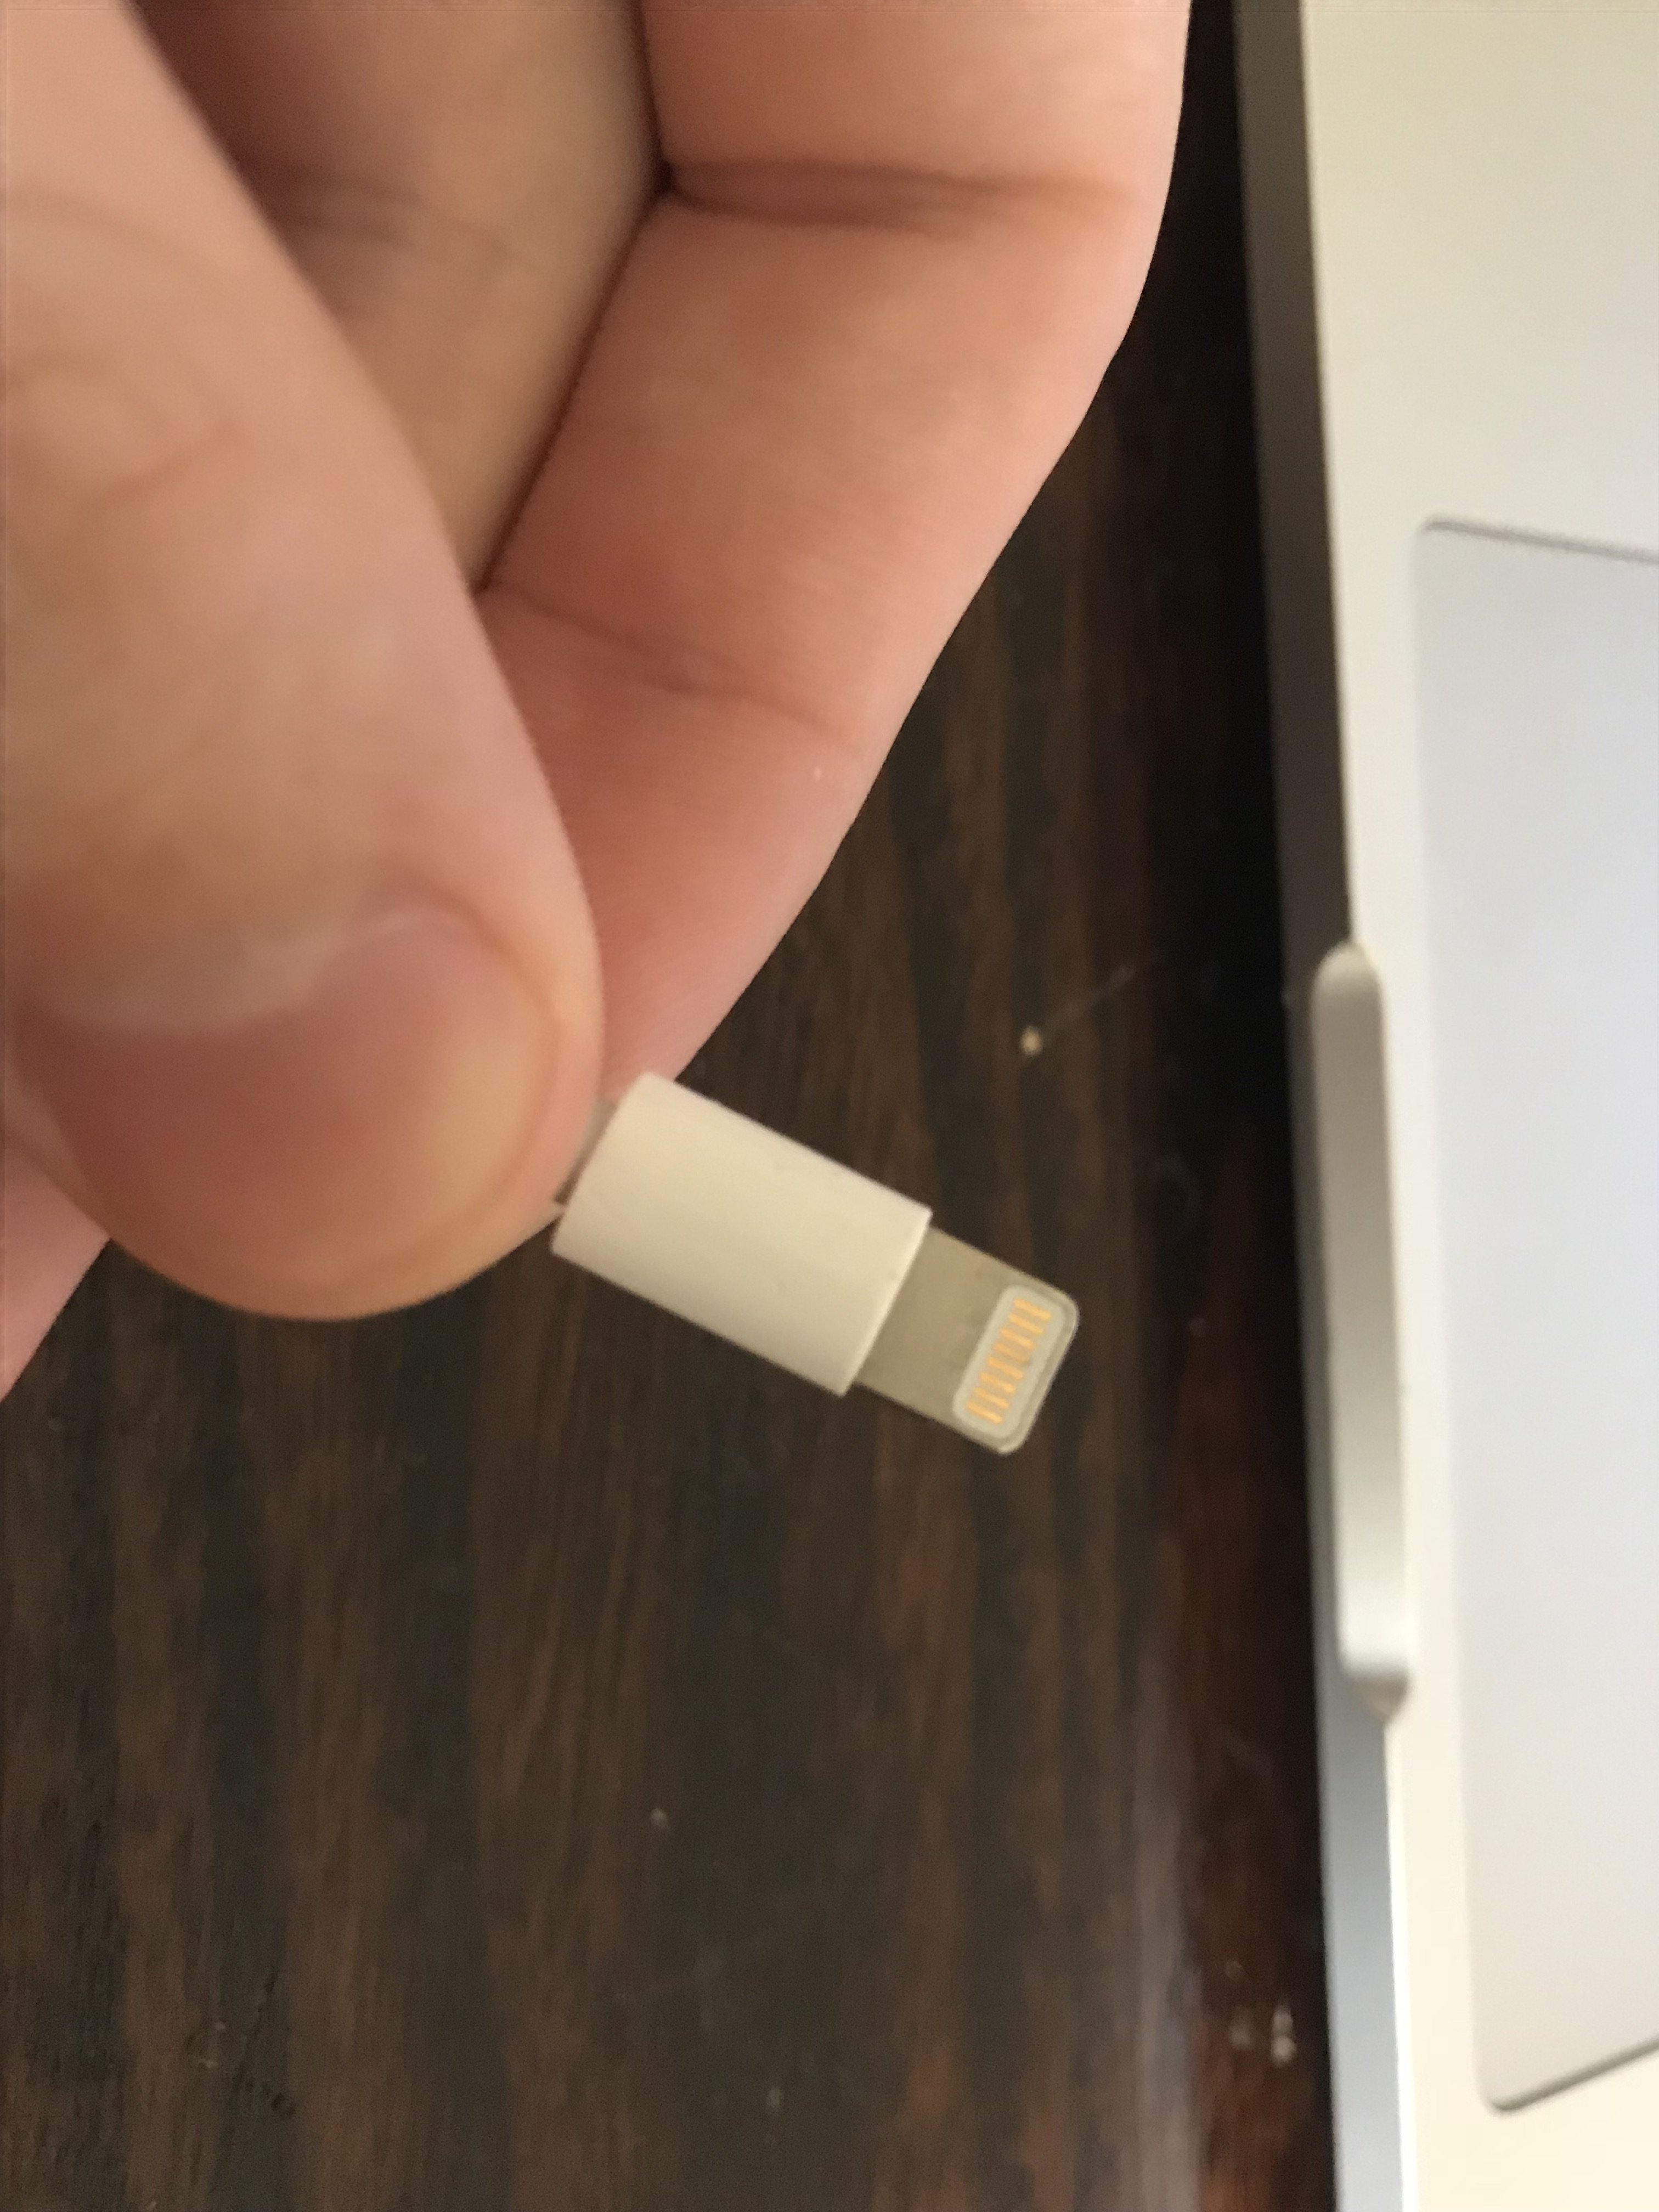 inspect both ends of lightning cable